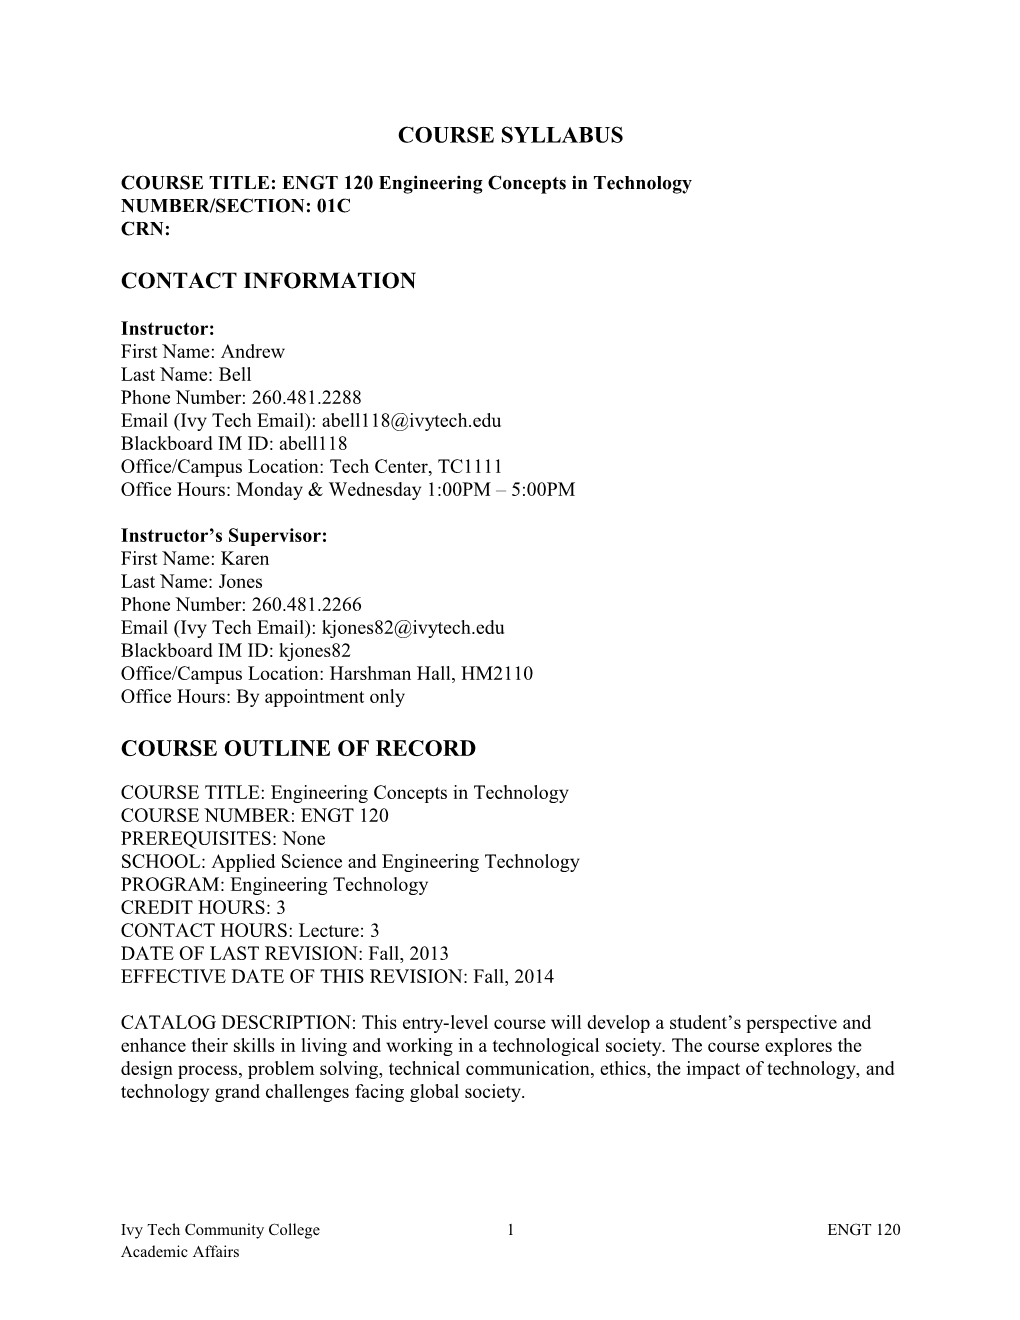 COURSE TITLE: ENGT 120 Engineering Concepts in Technology